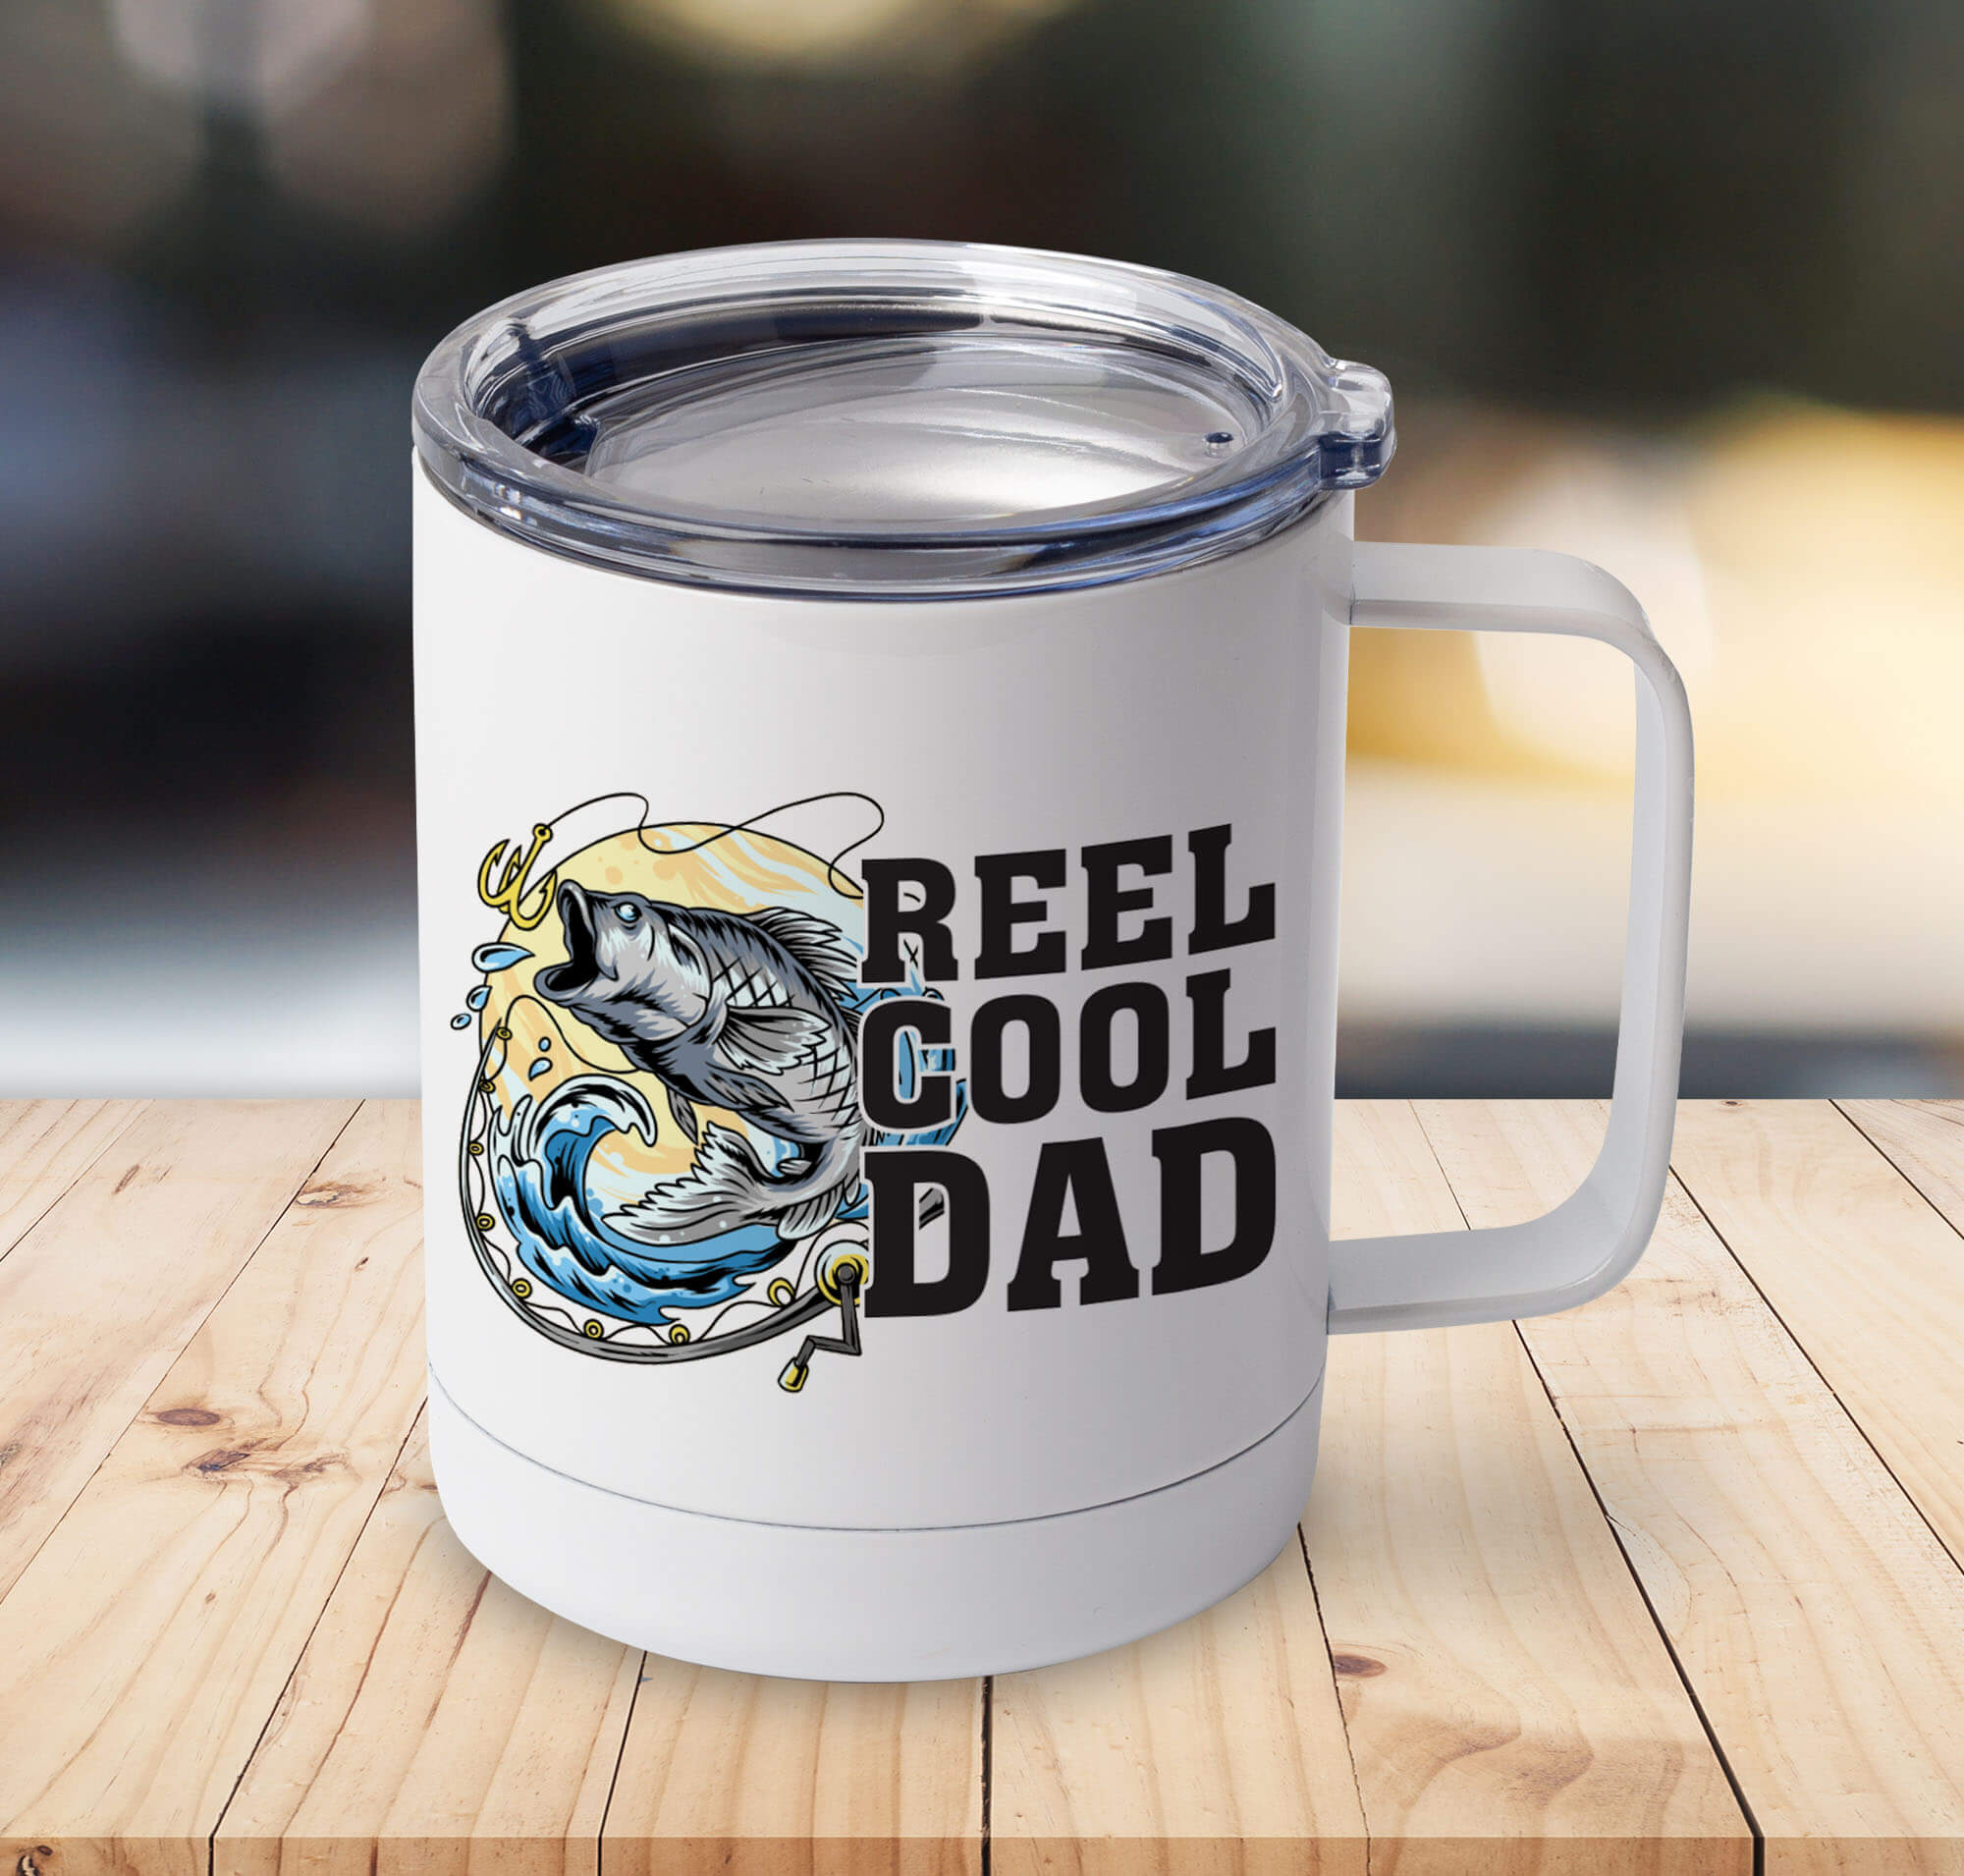 mug with lid customized with 'reel cool dad' and a fish image